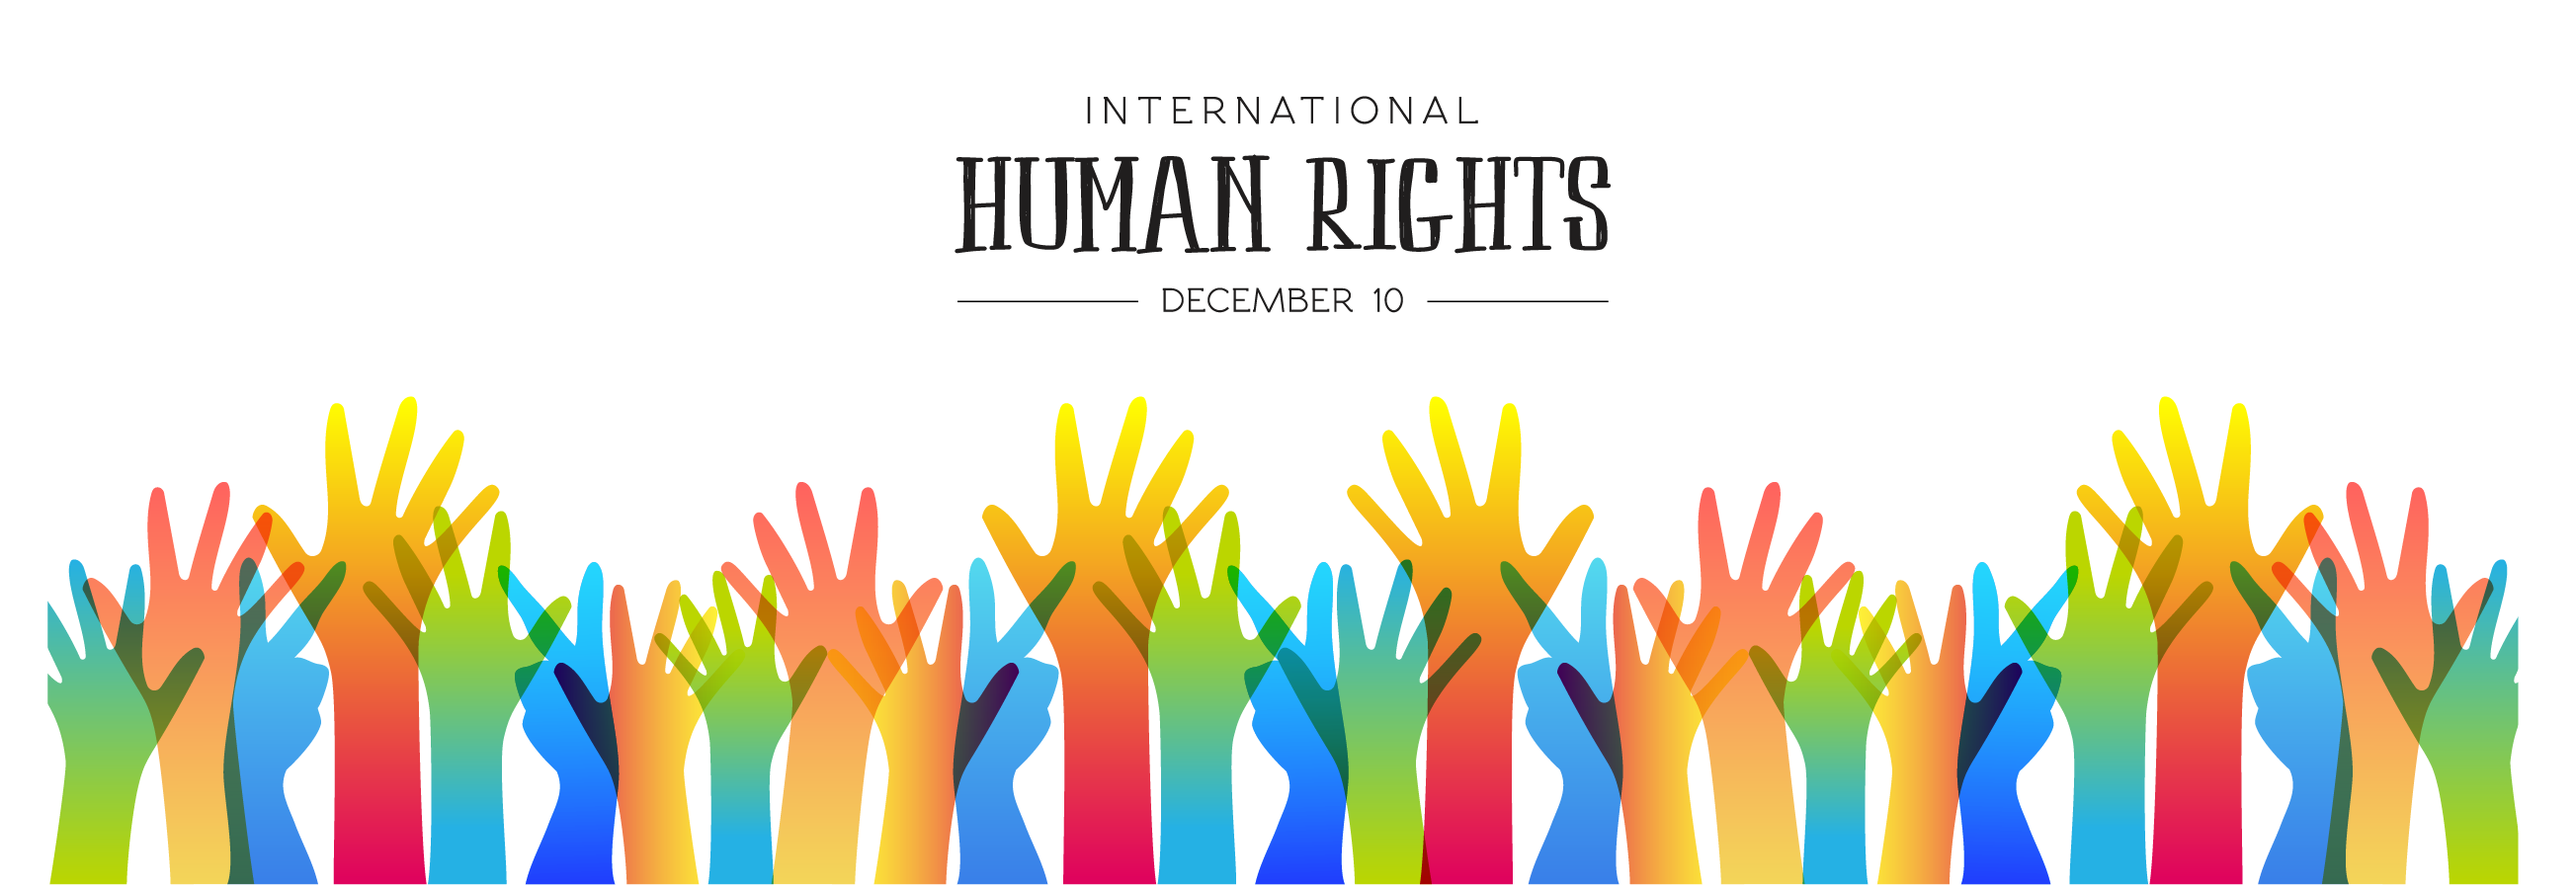 International Human Rights Day - 10th of December